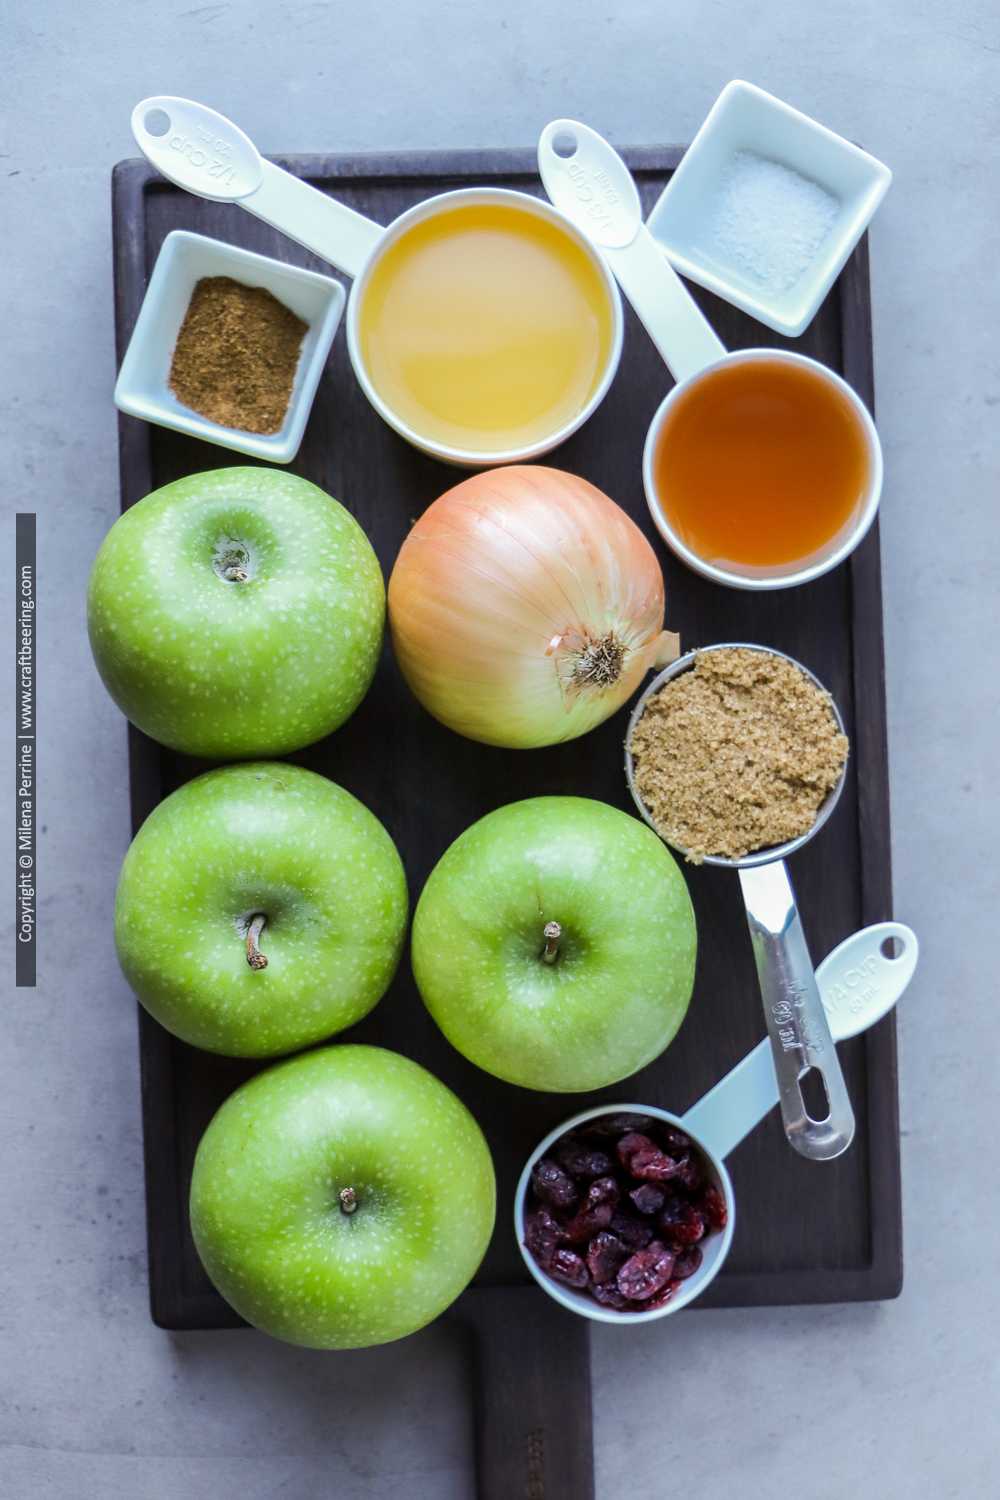 Green apples and other ingredients for apple chutney with cranberries